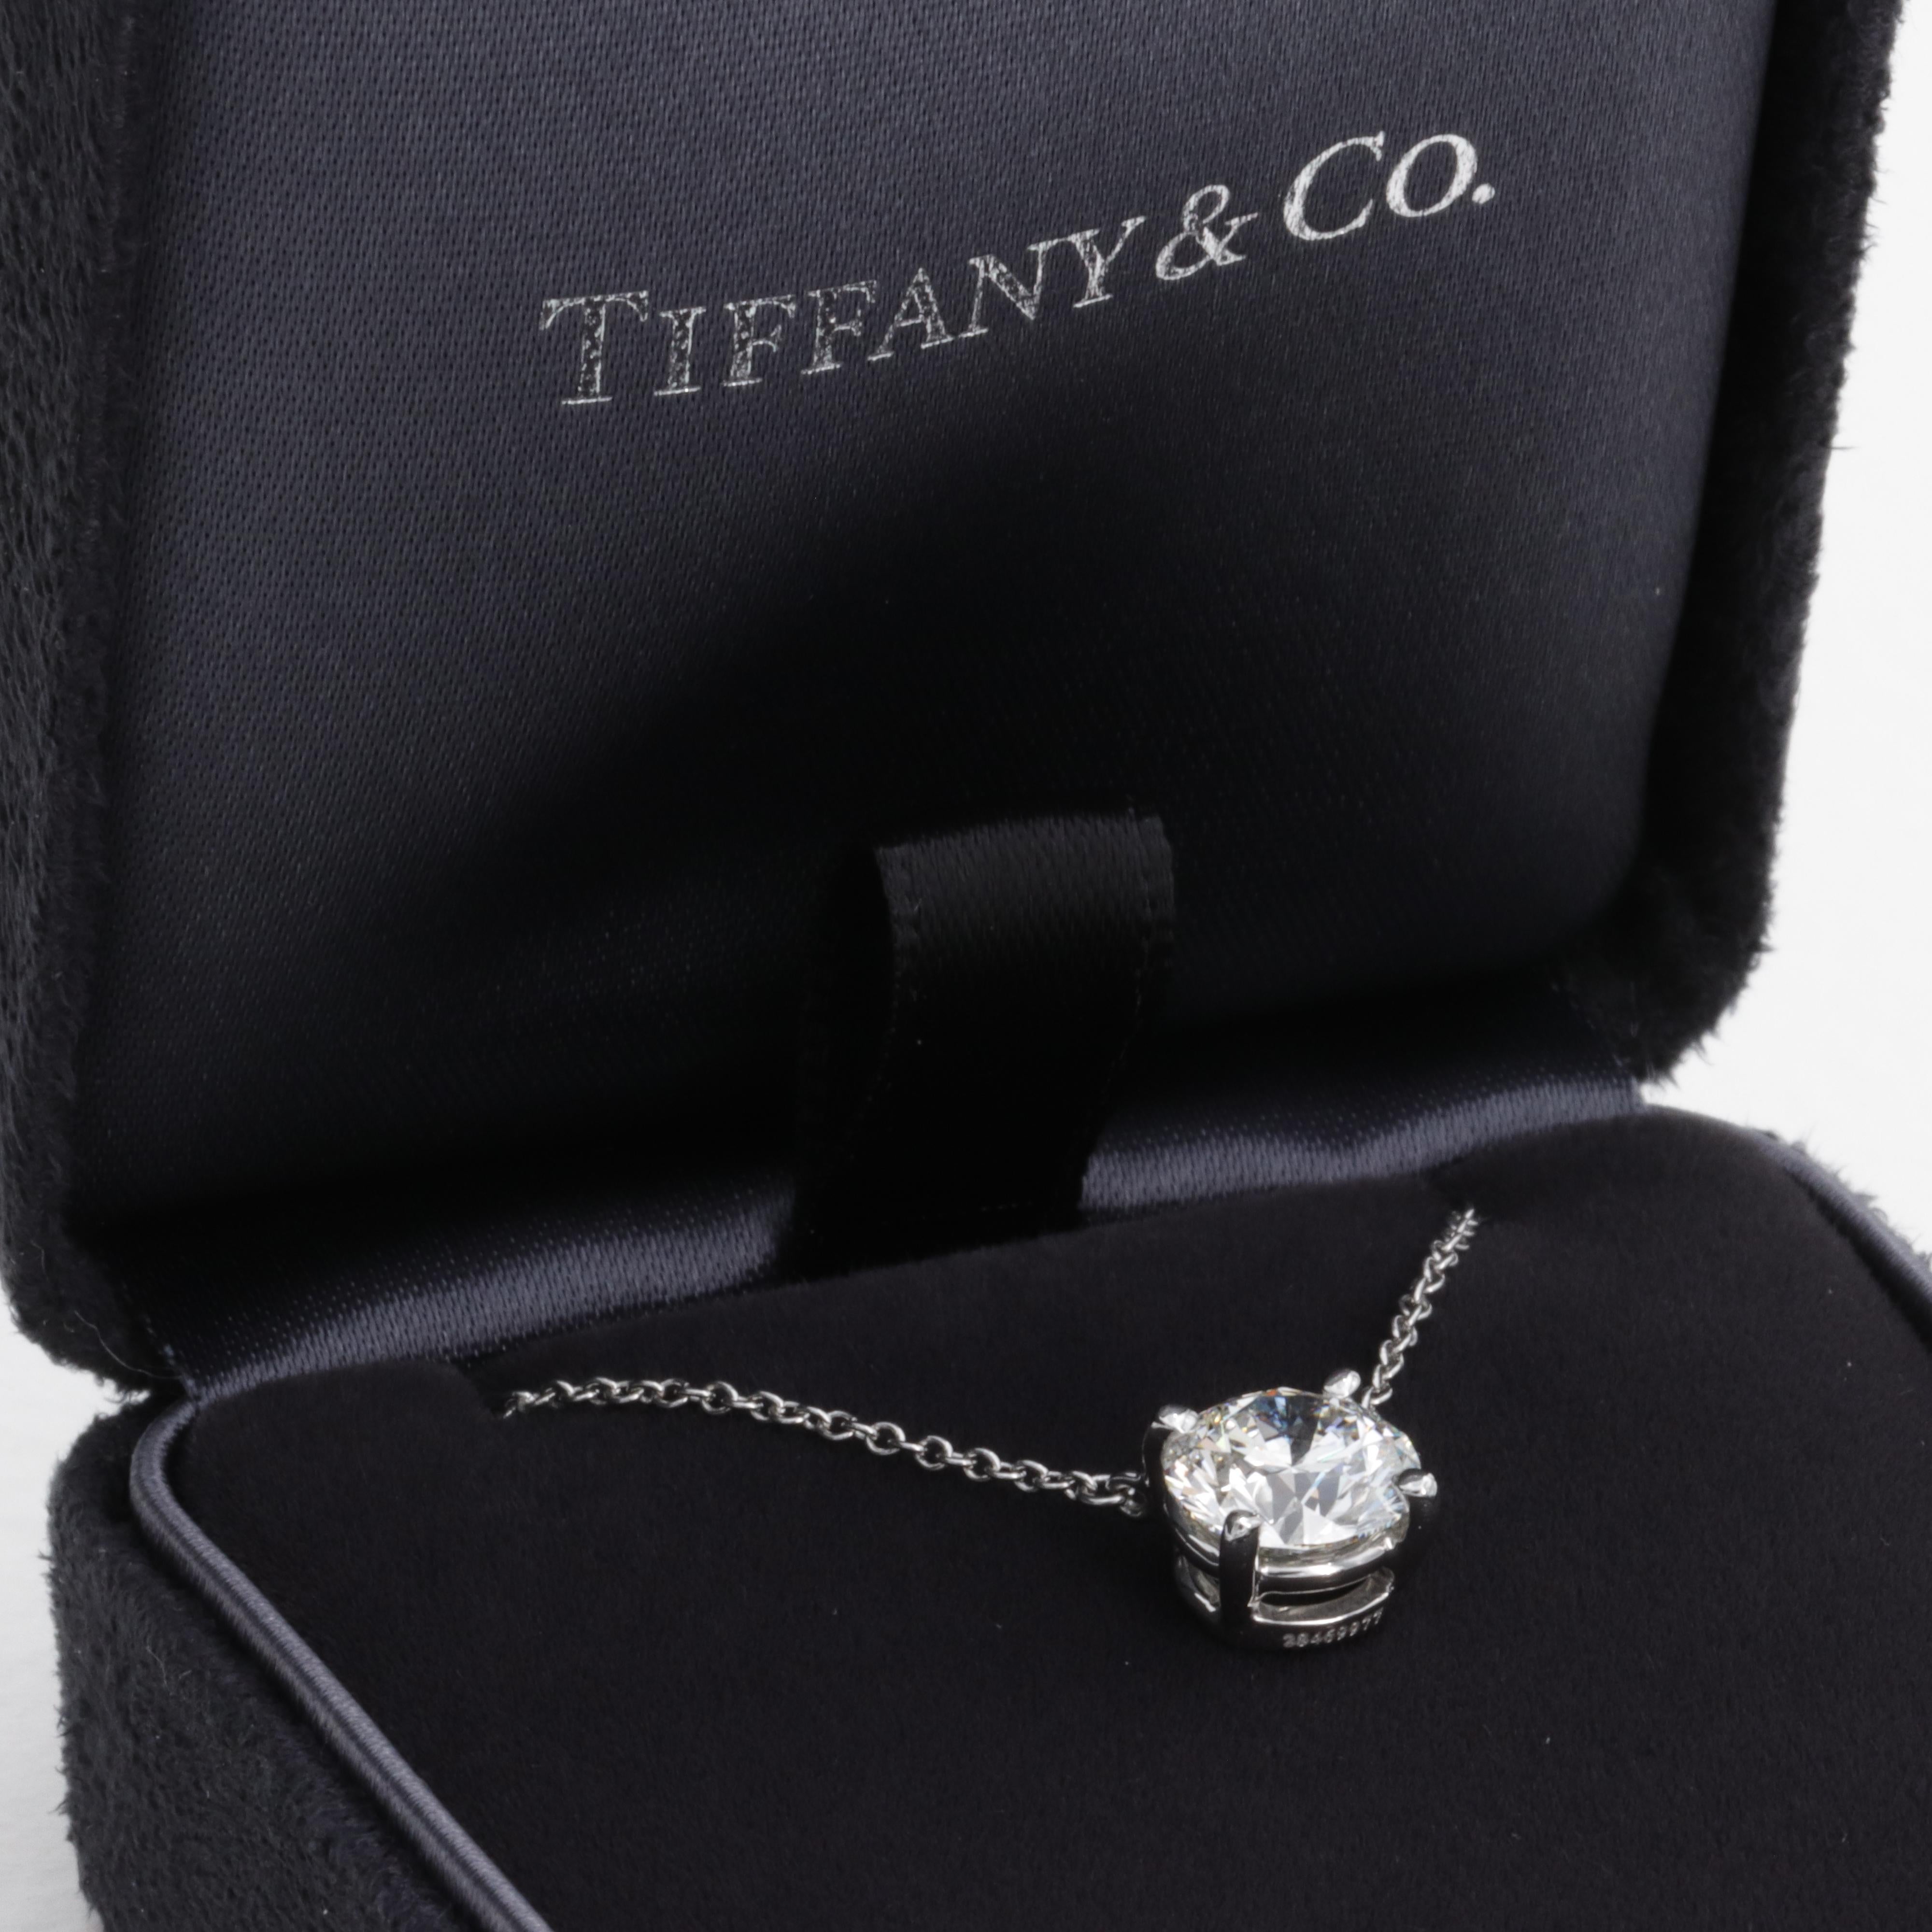 This fine natural diamond solitaire pendant necklace by Tiffany & Co. features a beautiful excellent cut 1.63 carat I color VVS2 clarity round brilliant cut diamond center stone. 

The diamond is expertly set in it's original Tiffany & Co. platinum